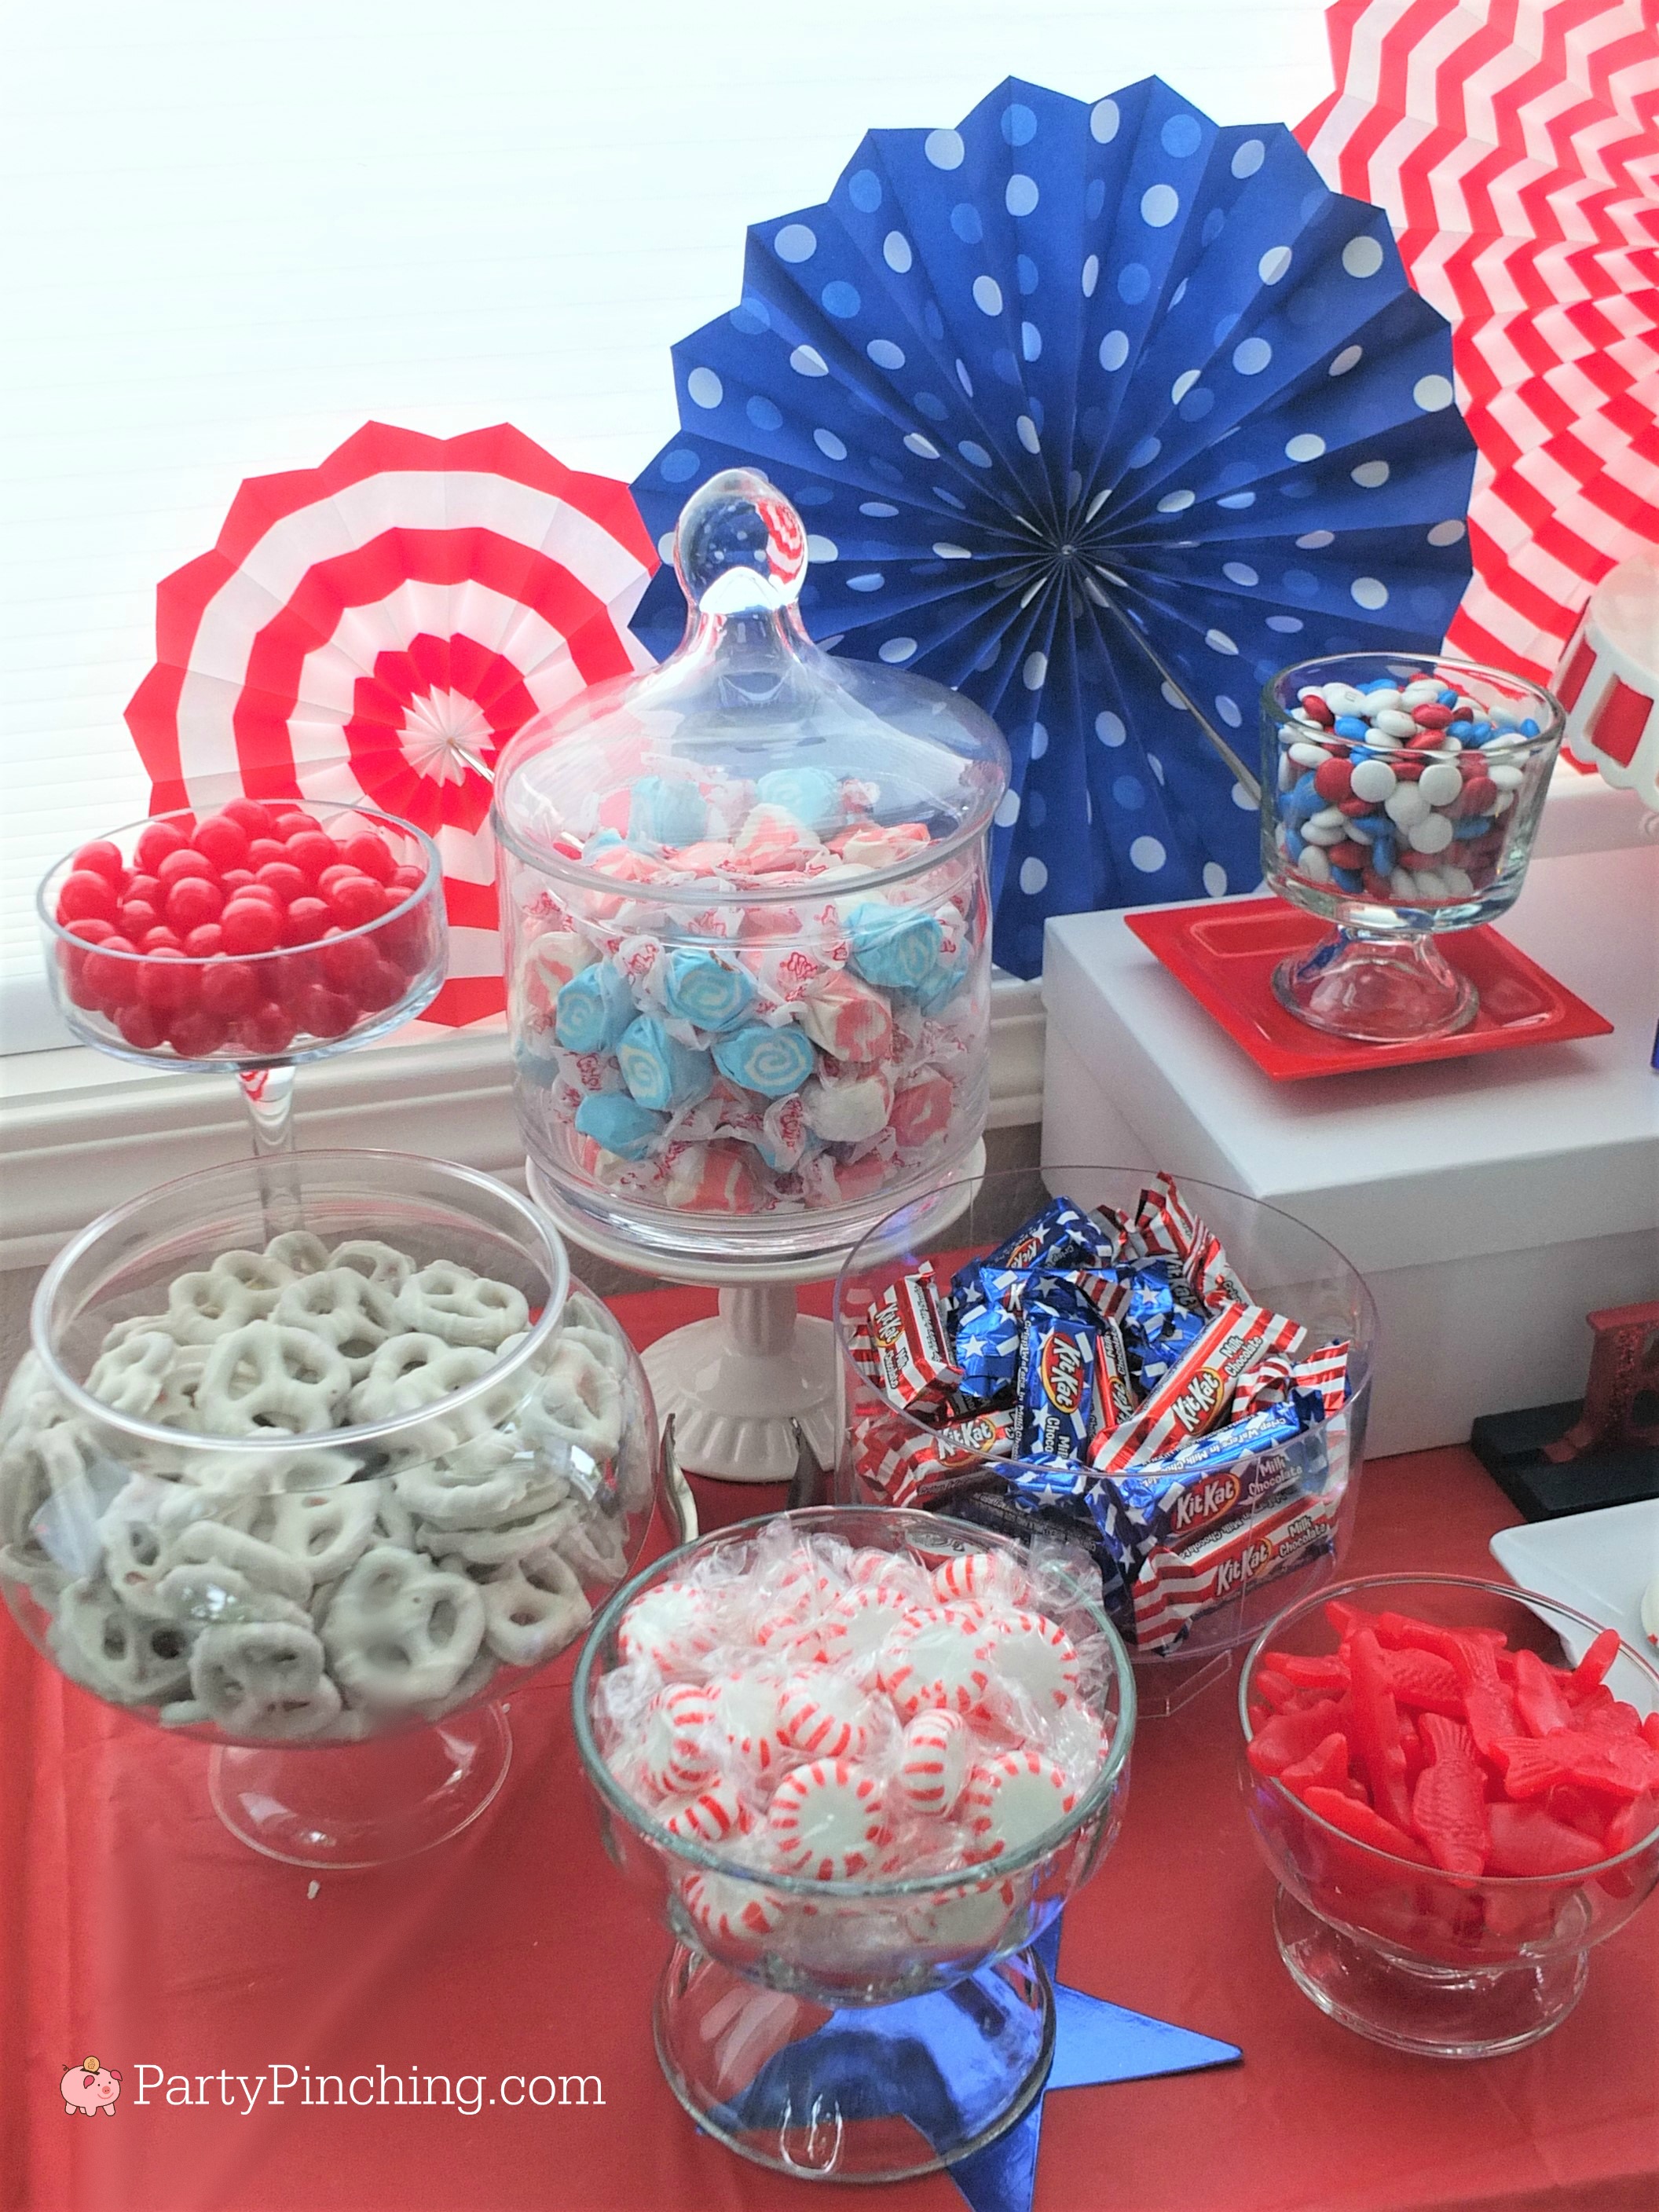 4th of July dessert ideas, easy patriotic candy buffet, red white